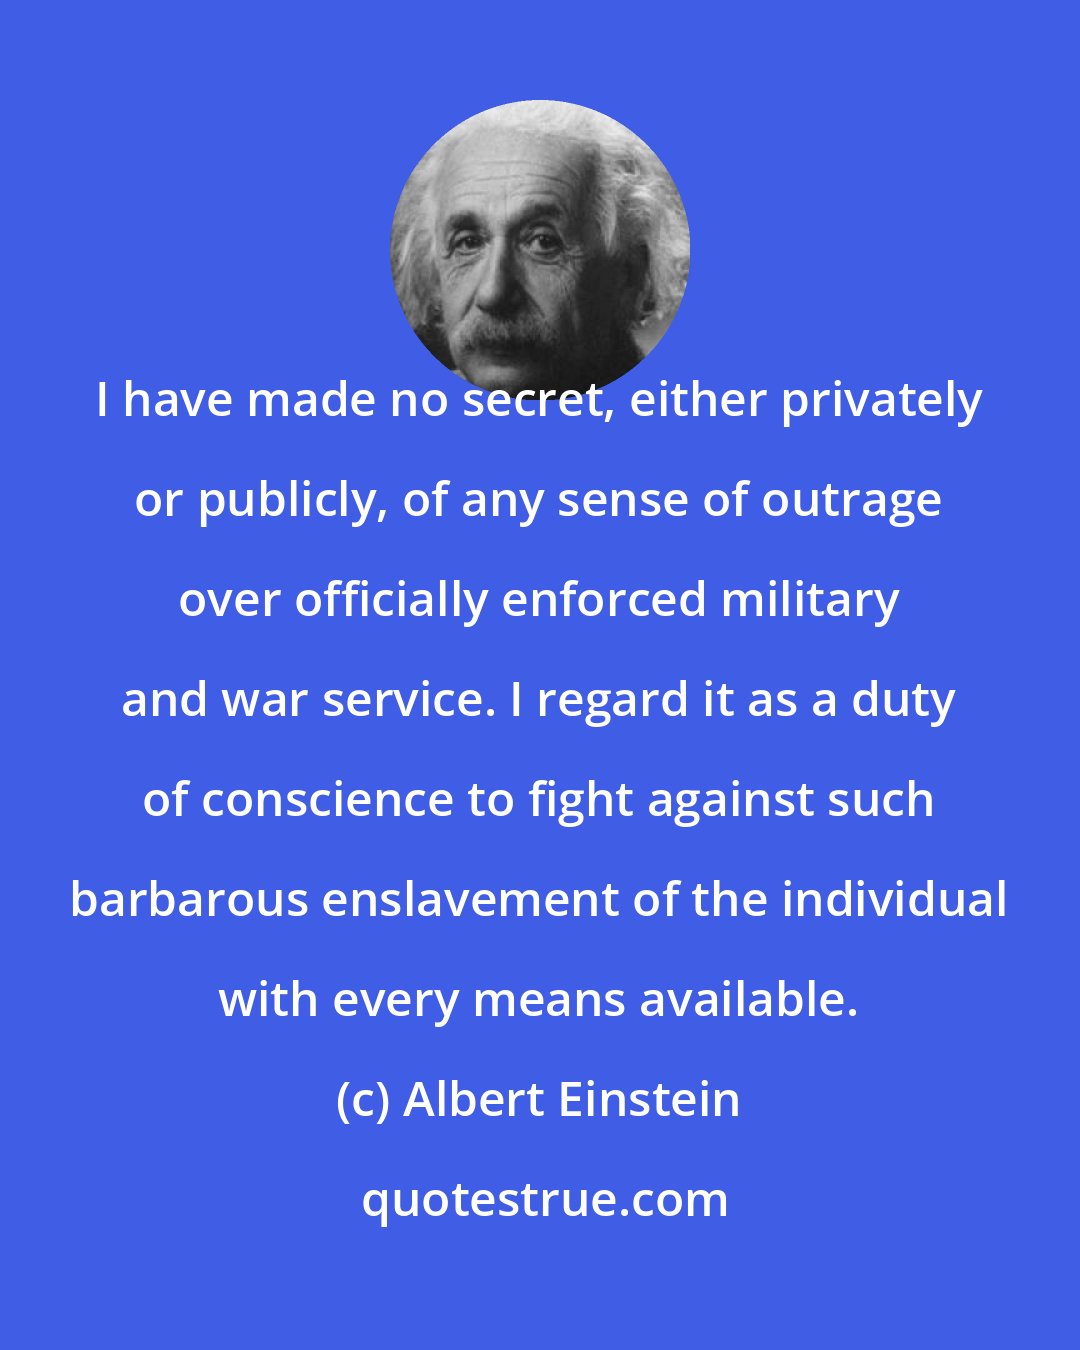 Albert Einstein: I have made no secret, either privately or publicly, of any sense of outrage over officially enforced military and war service. I regard it as a duty of conscience to fight against such barbarous enslavement of the individual with every means available.